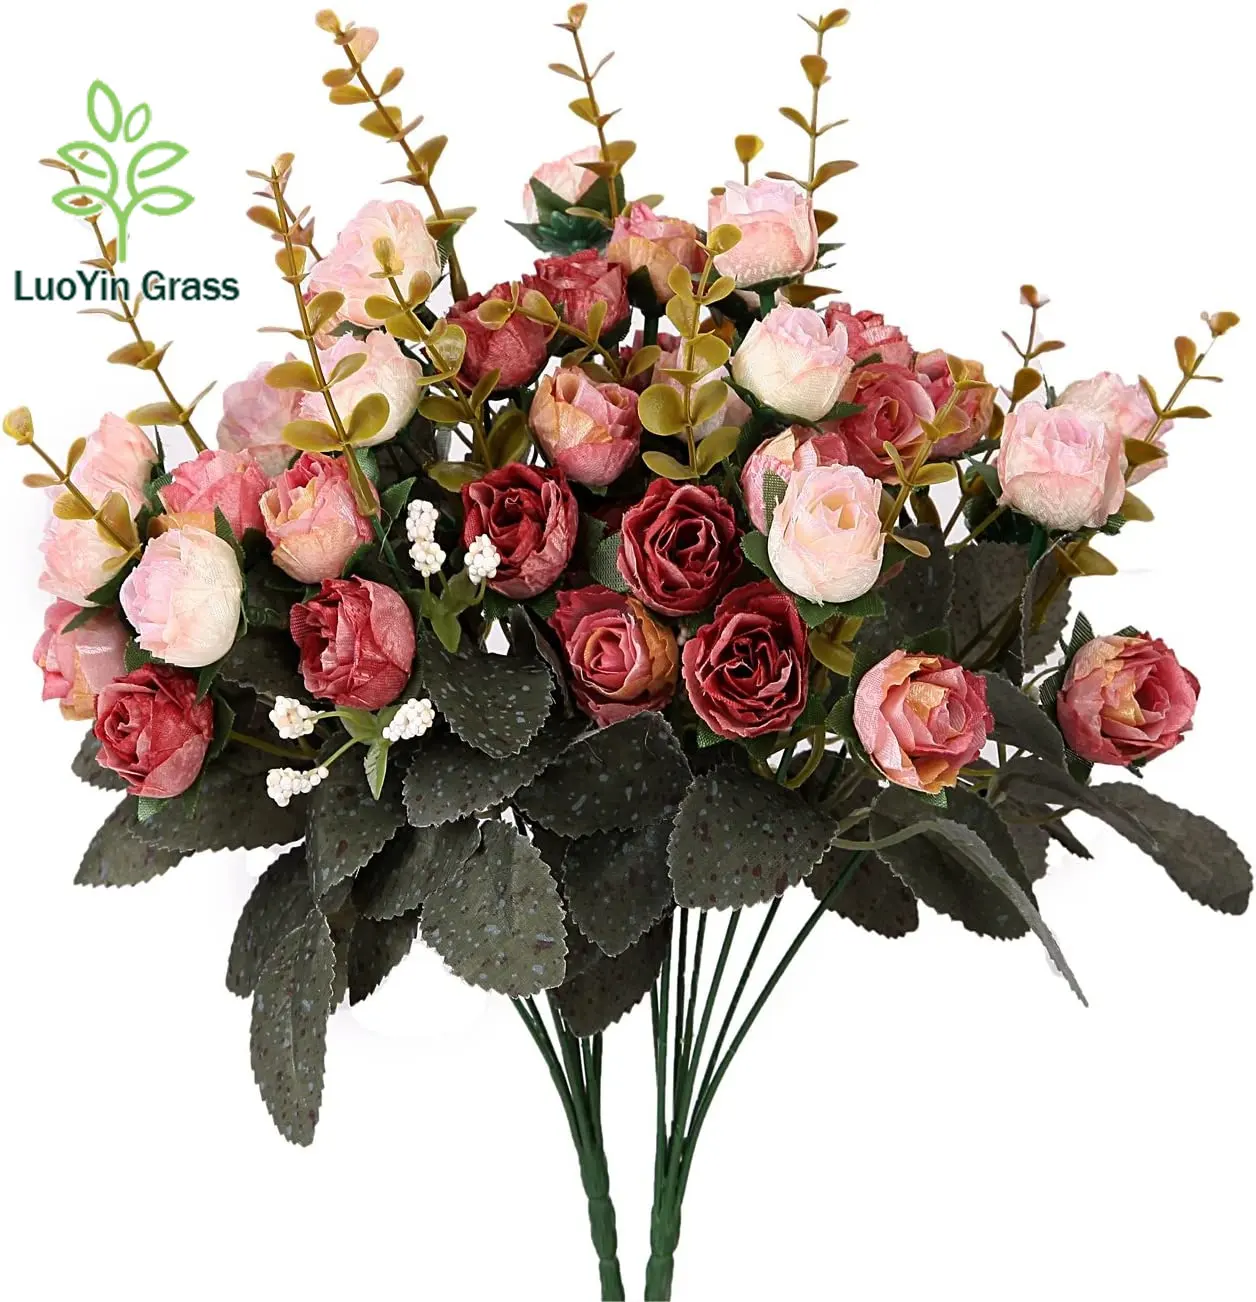 LY 7 Branch 21 Heads Artificial Flowers Bouquet Mini Rose Wedding Home Office Decor